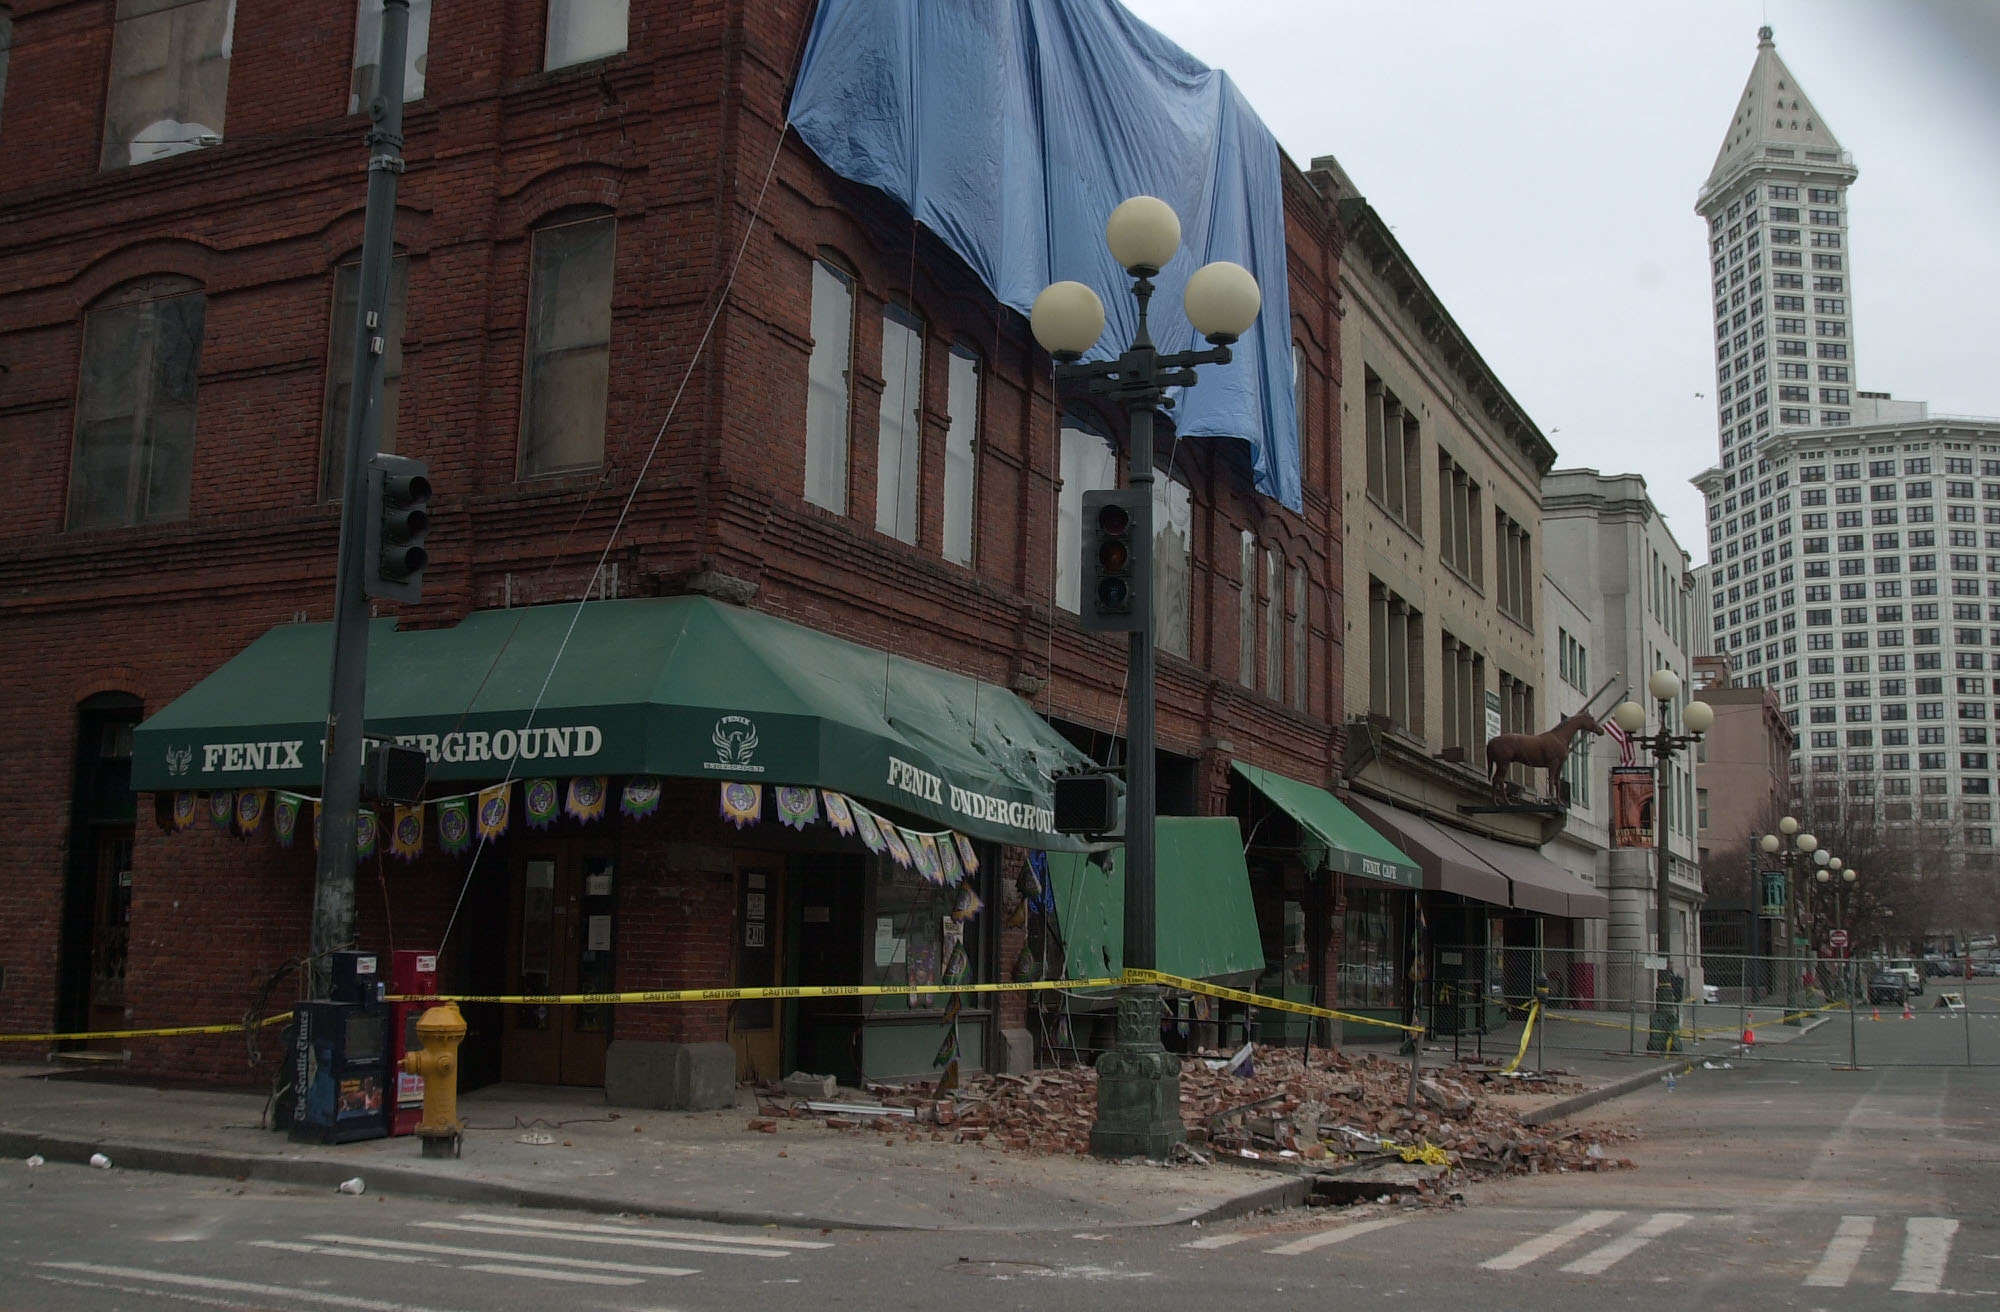 Seattle, WA, 03/05/01 -- Damage in Pioneer Square from the 02/28 earthquake. Photo by: Liz Roll/FEMA News Photo. After rehabilitation, the Cadillac Hotel building in the foreground became the new visitor center of the Klondike Gold Rush National Historical Park.